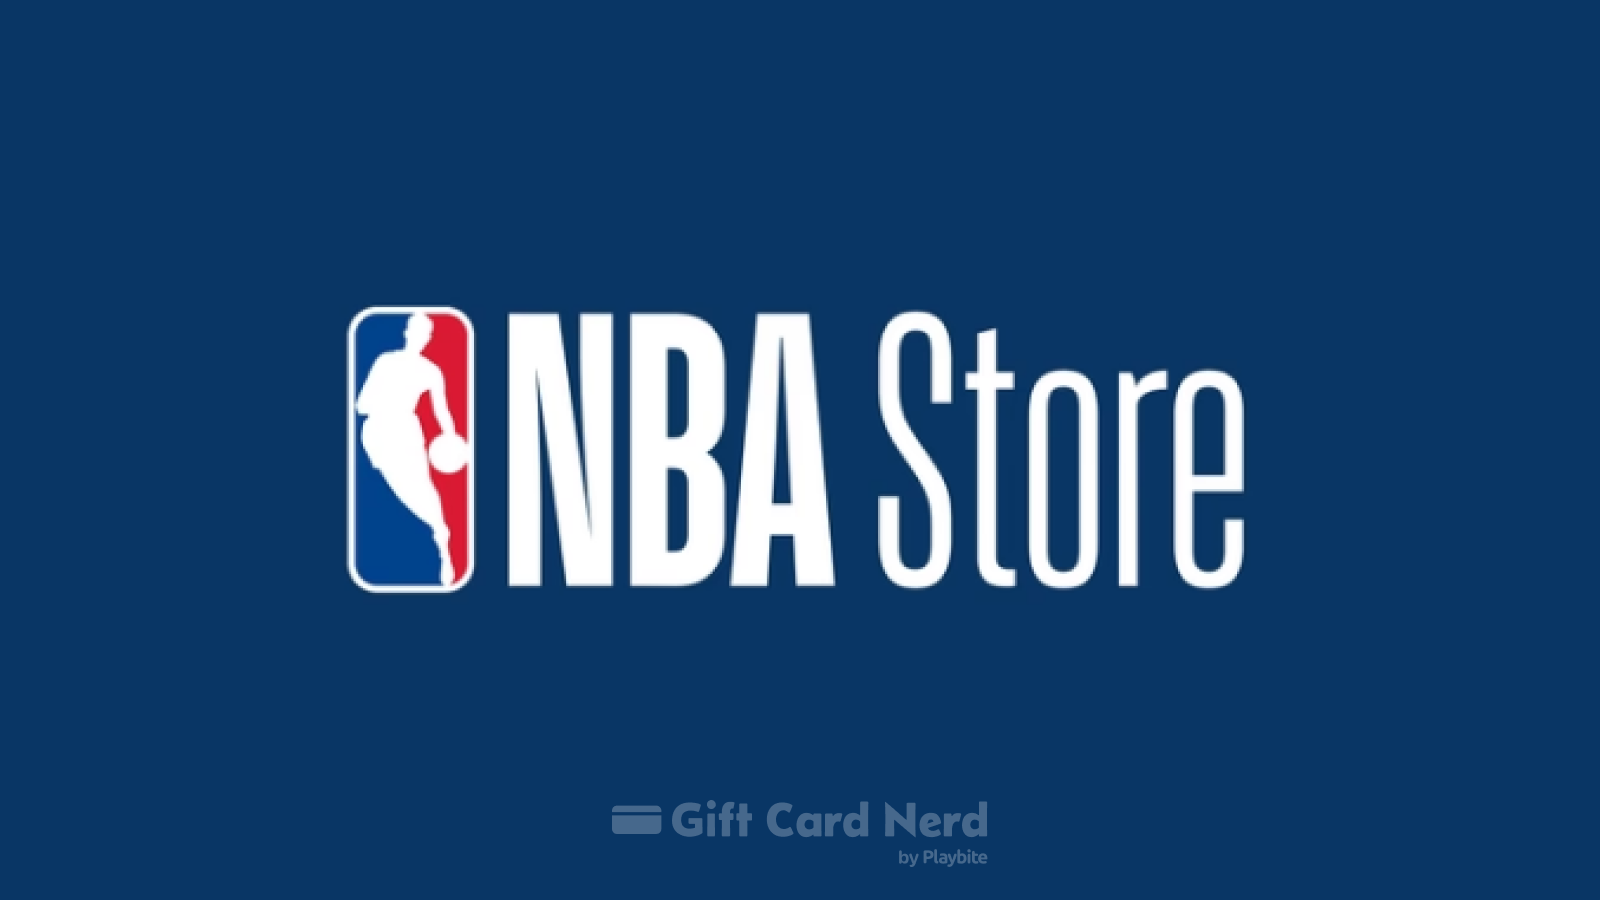 Can I Use an NBA Store Gift Card on DoorDash?